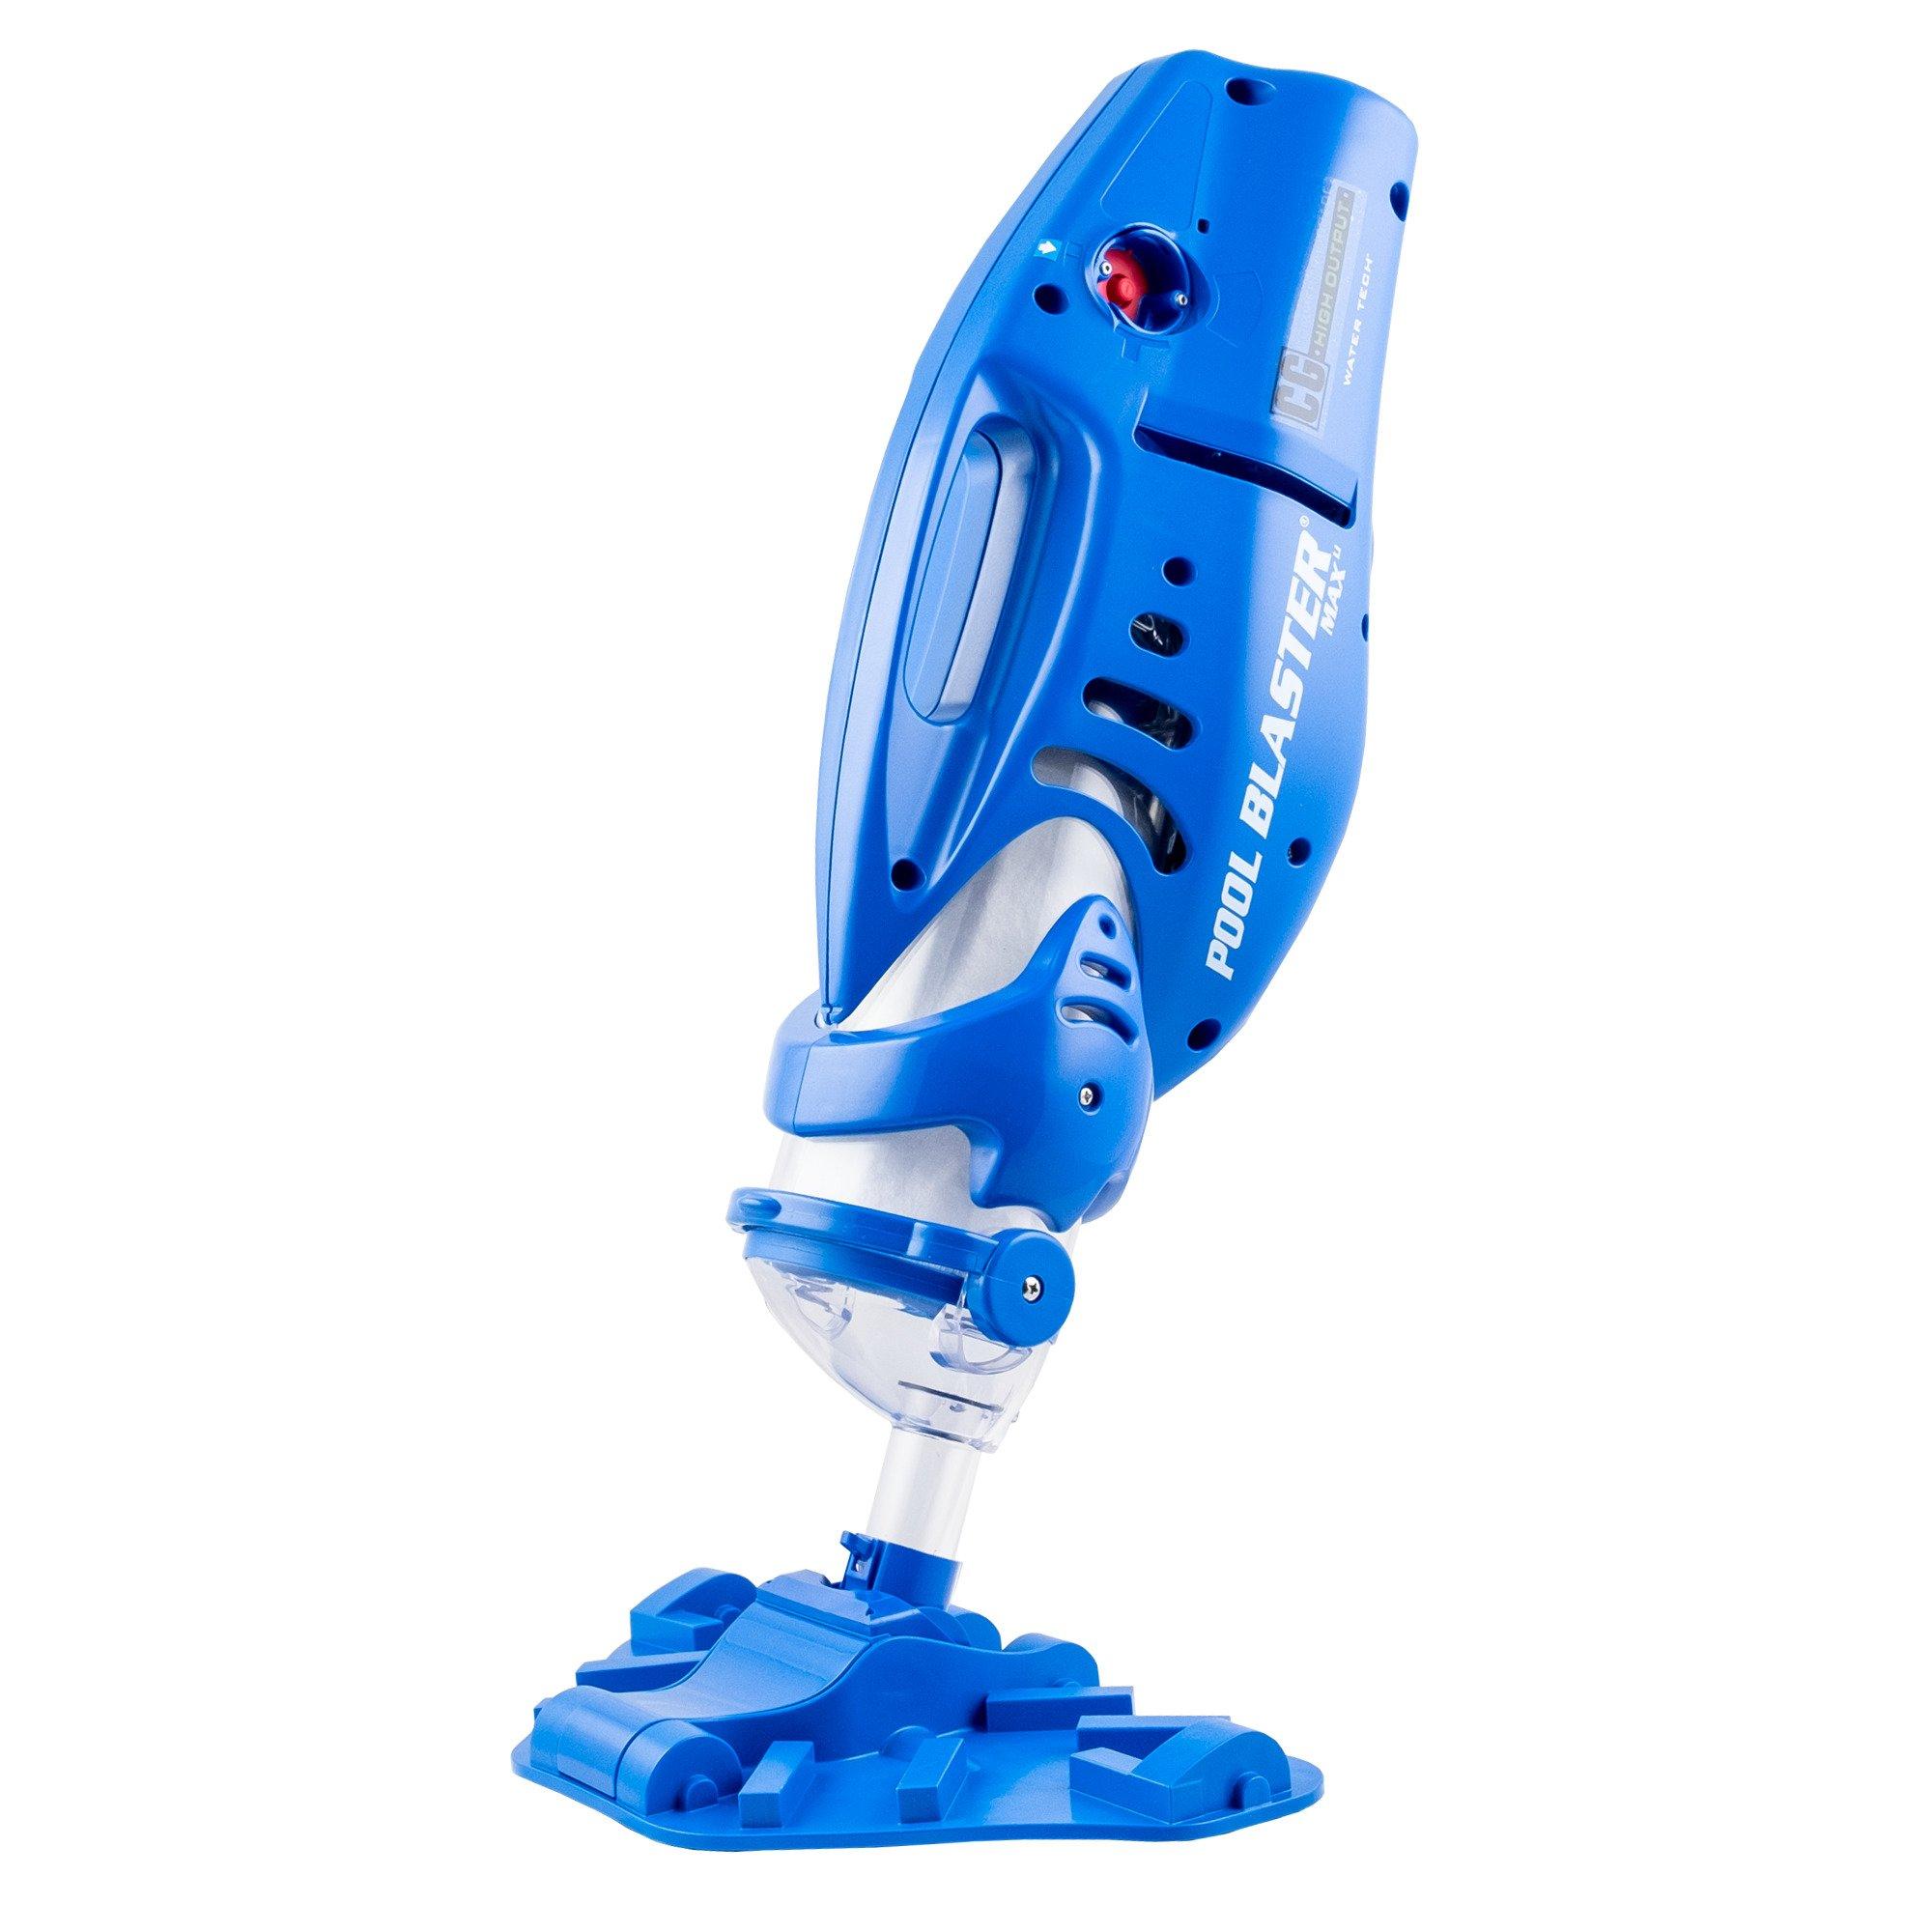 Water Tech Pool Blaster Max CG Pool and Spa Cleaner - image 1 of 5